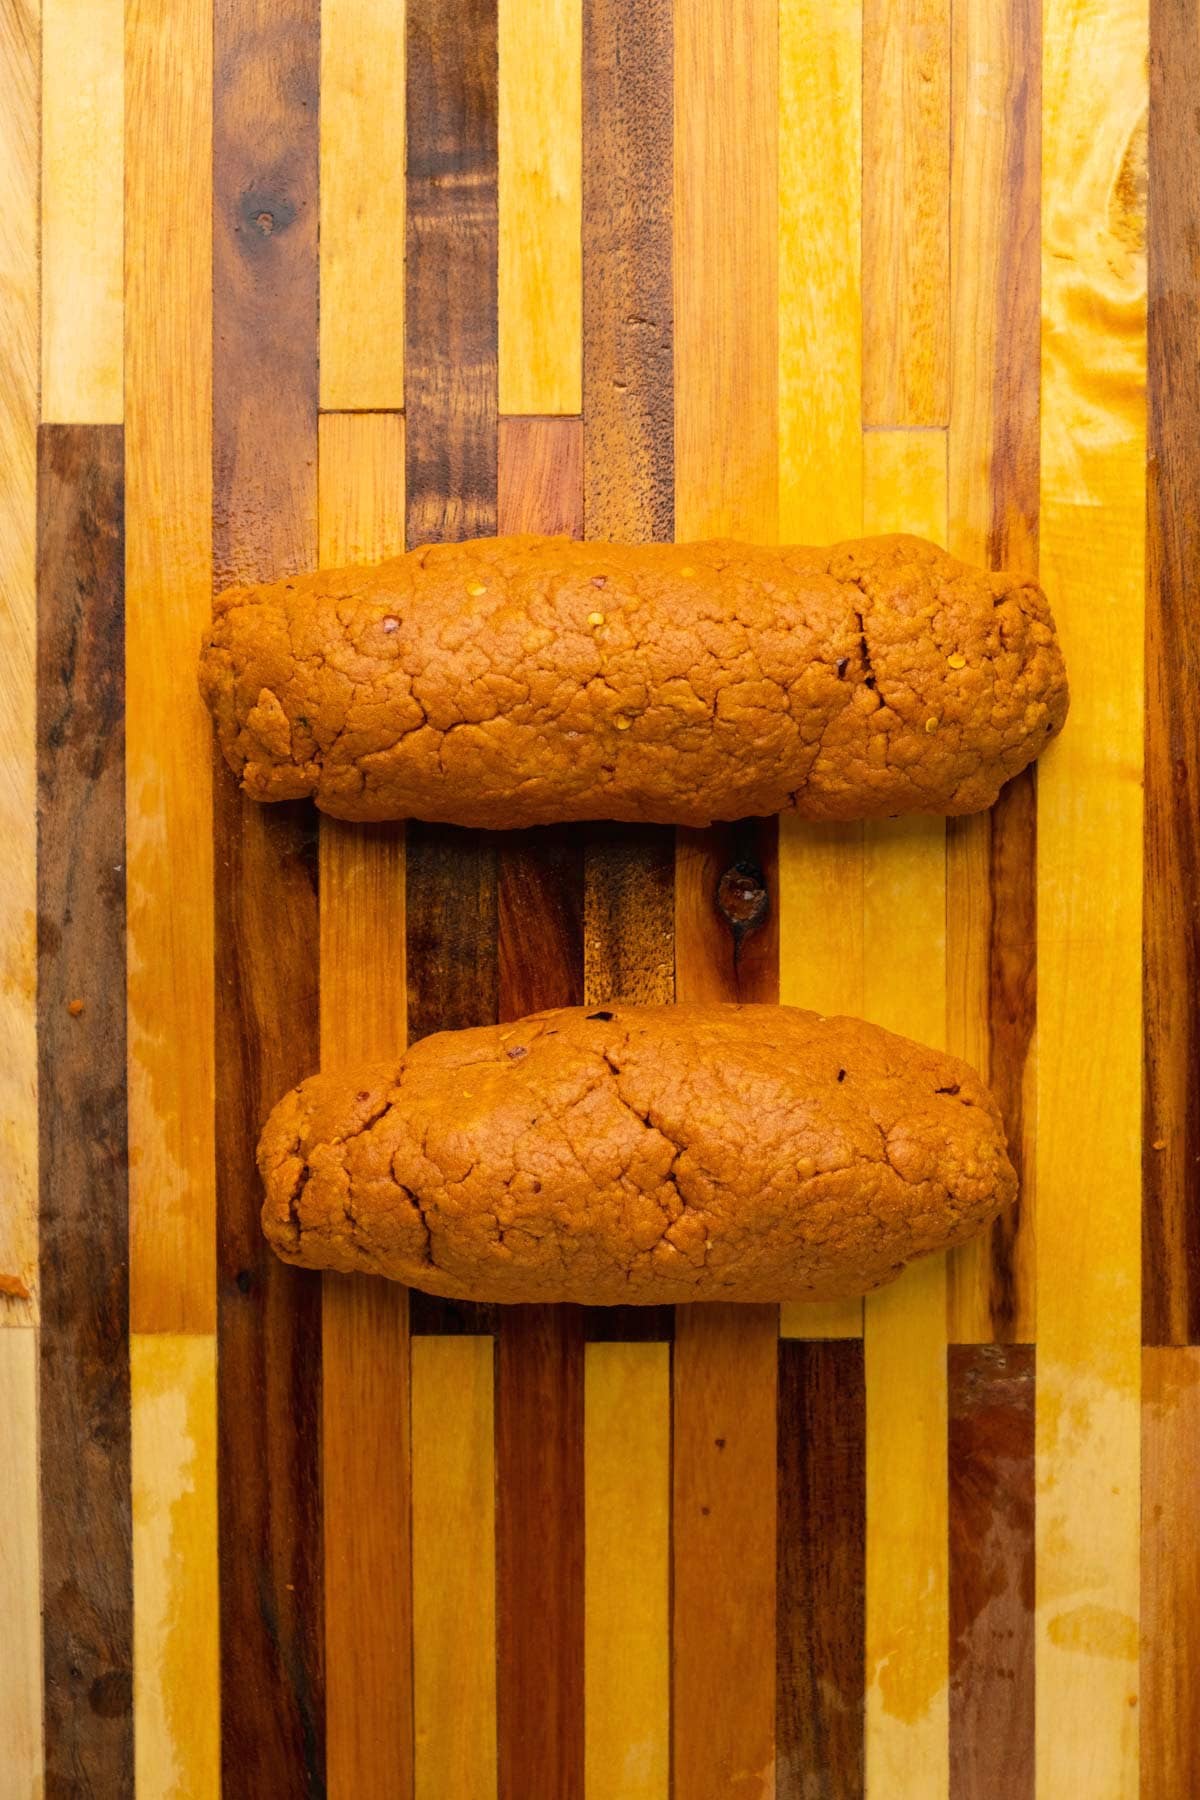 Seitan formed into two loaf shapes.